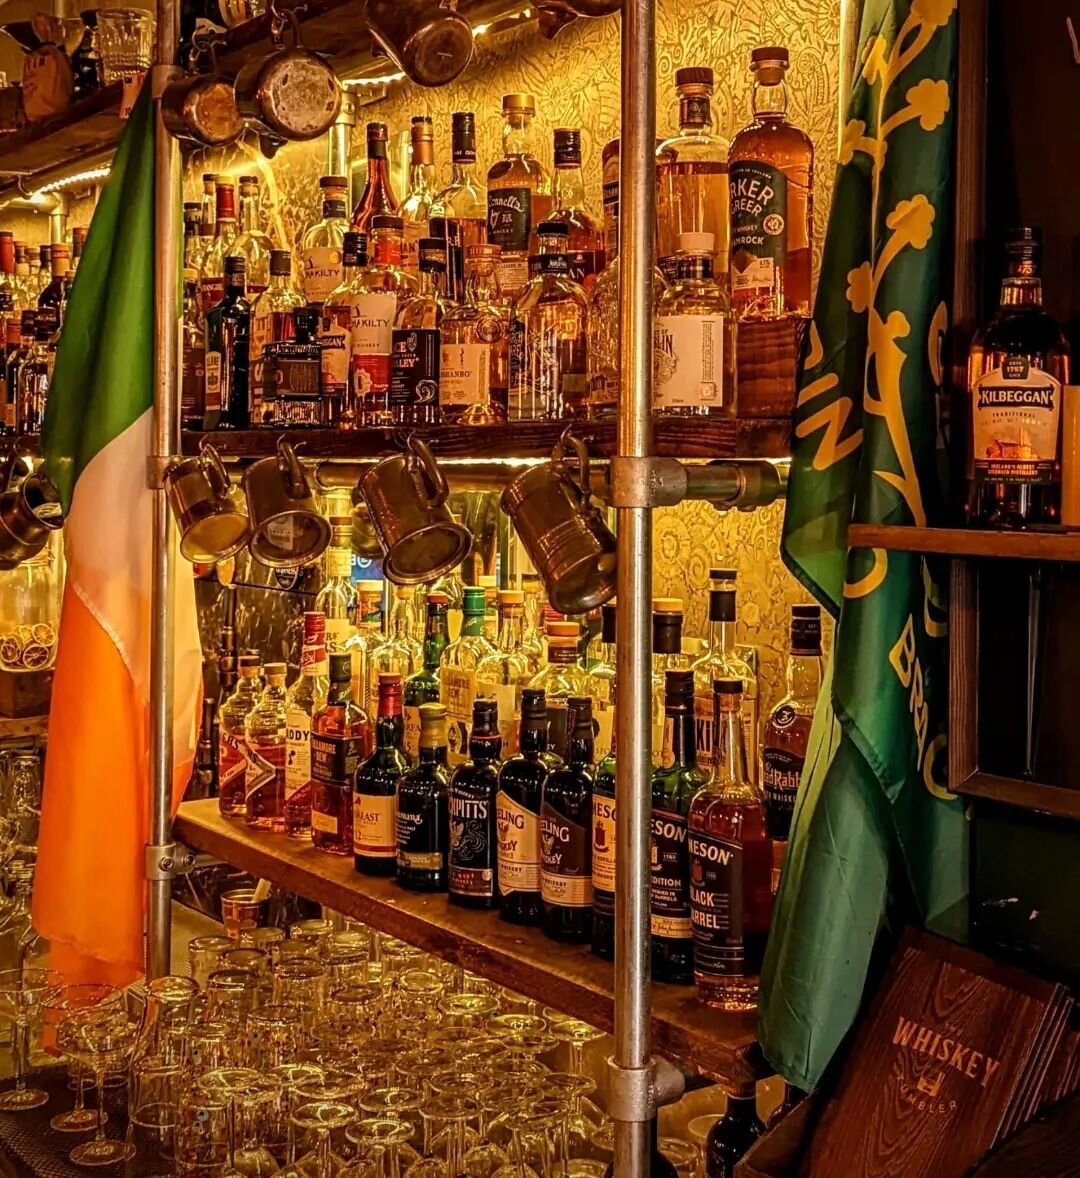 🇮🇪 ☘️ Happy International Irish Whiskey Day! ☘️ 🇮🇪

What best wets your whistle? What's clearer than crystal? What's sweeter than honey and stronger than steam?

What better way to celebrate today than with your favourite Irish whiskey and live m